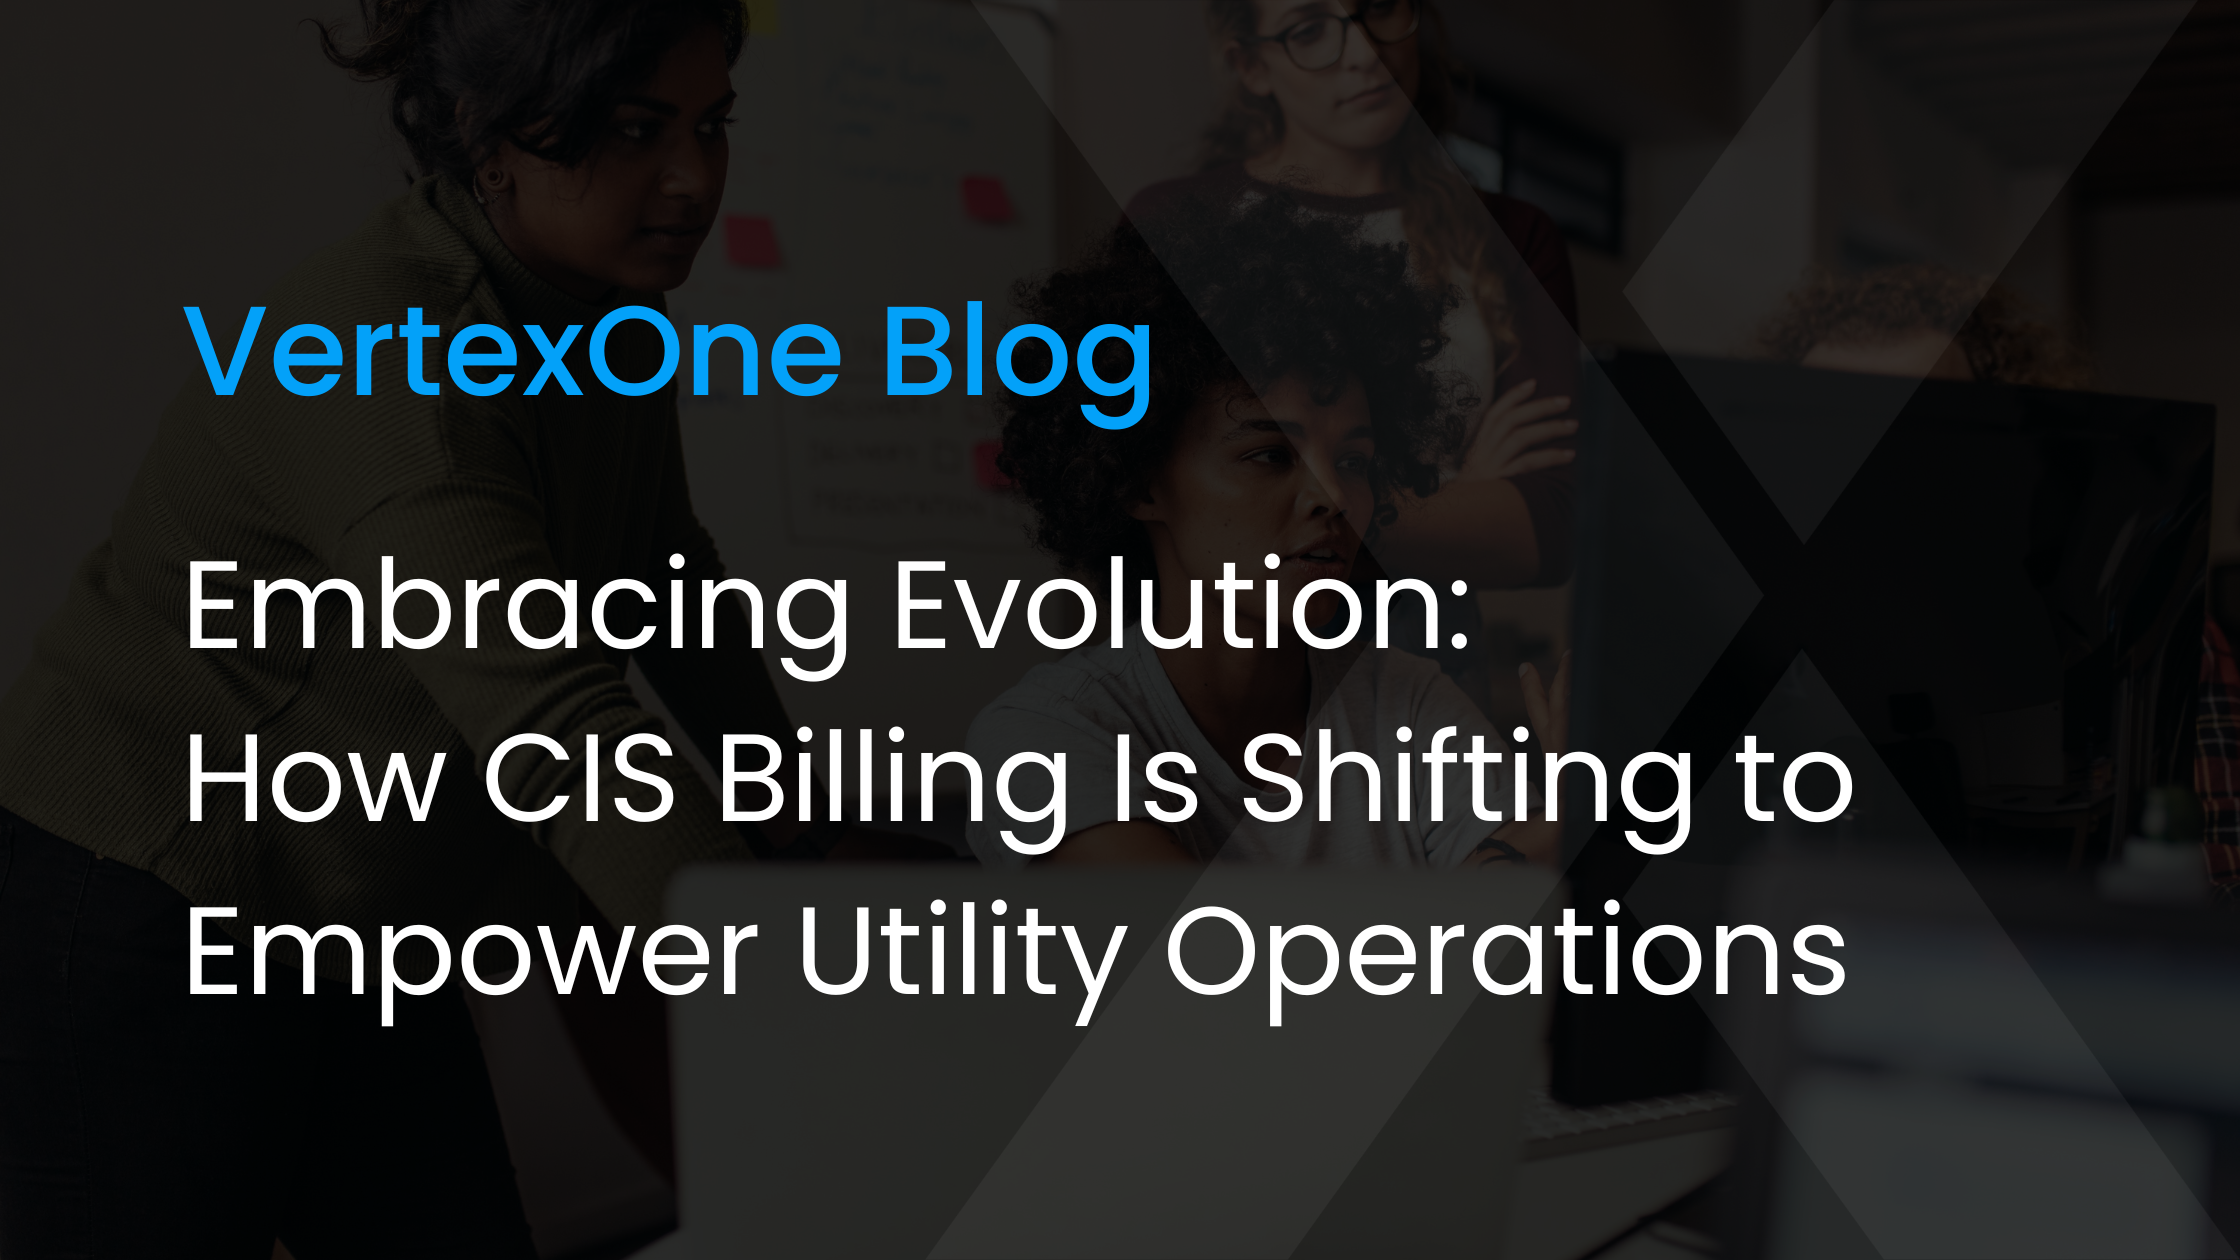 Embracing Evolution: How CIS Billing Is Shifting to Empower Utility Operations